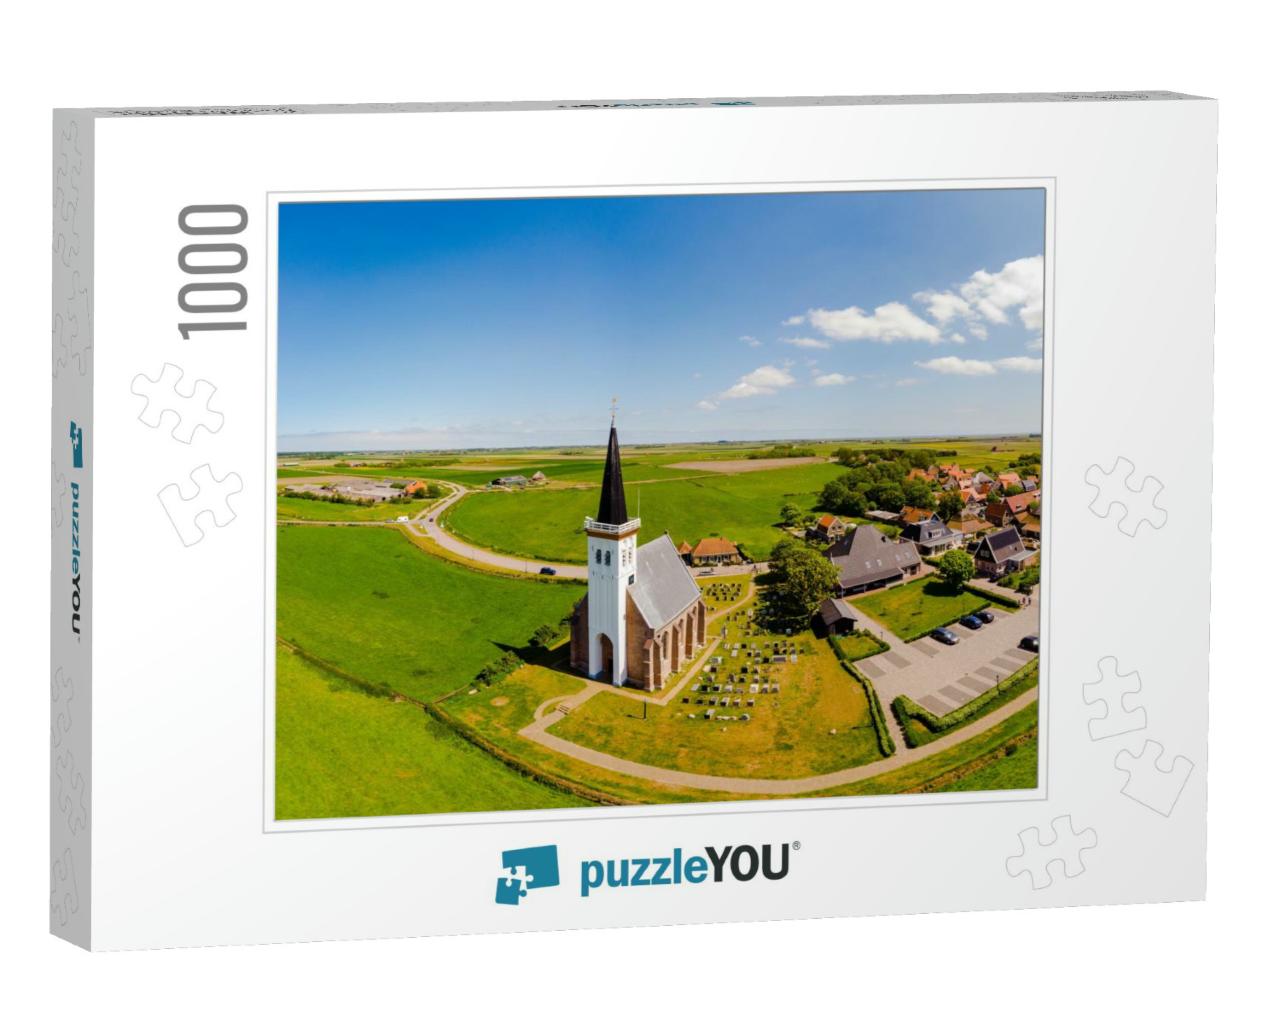 White Church Den Hoorn Texel Netherlands, Beautiful Churc... Jigsaw Puzzle with 1000 pieces